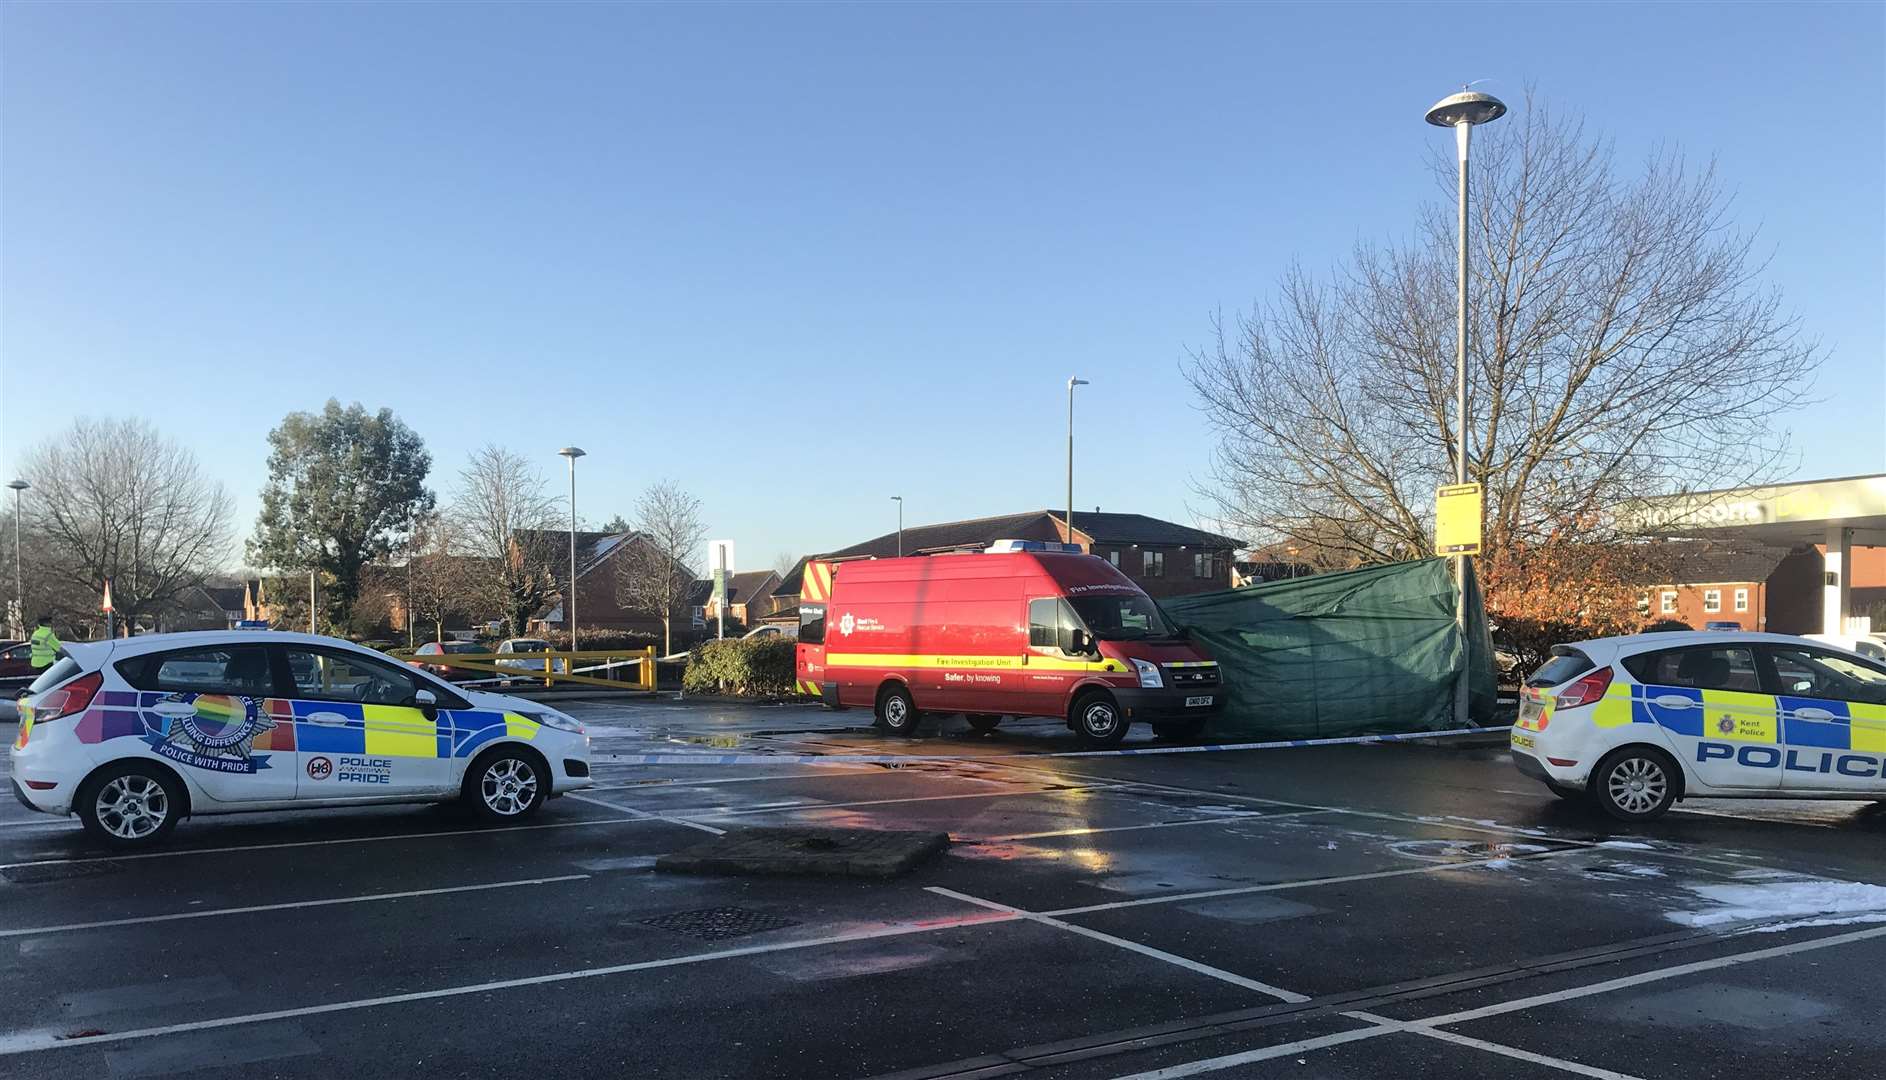 Emergency services at the scene of the fatal car fire at Morrisons in Maidstone